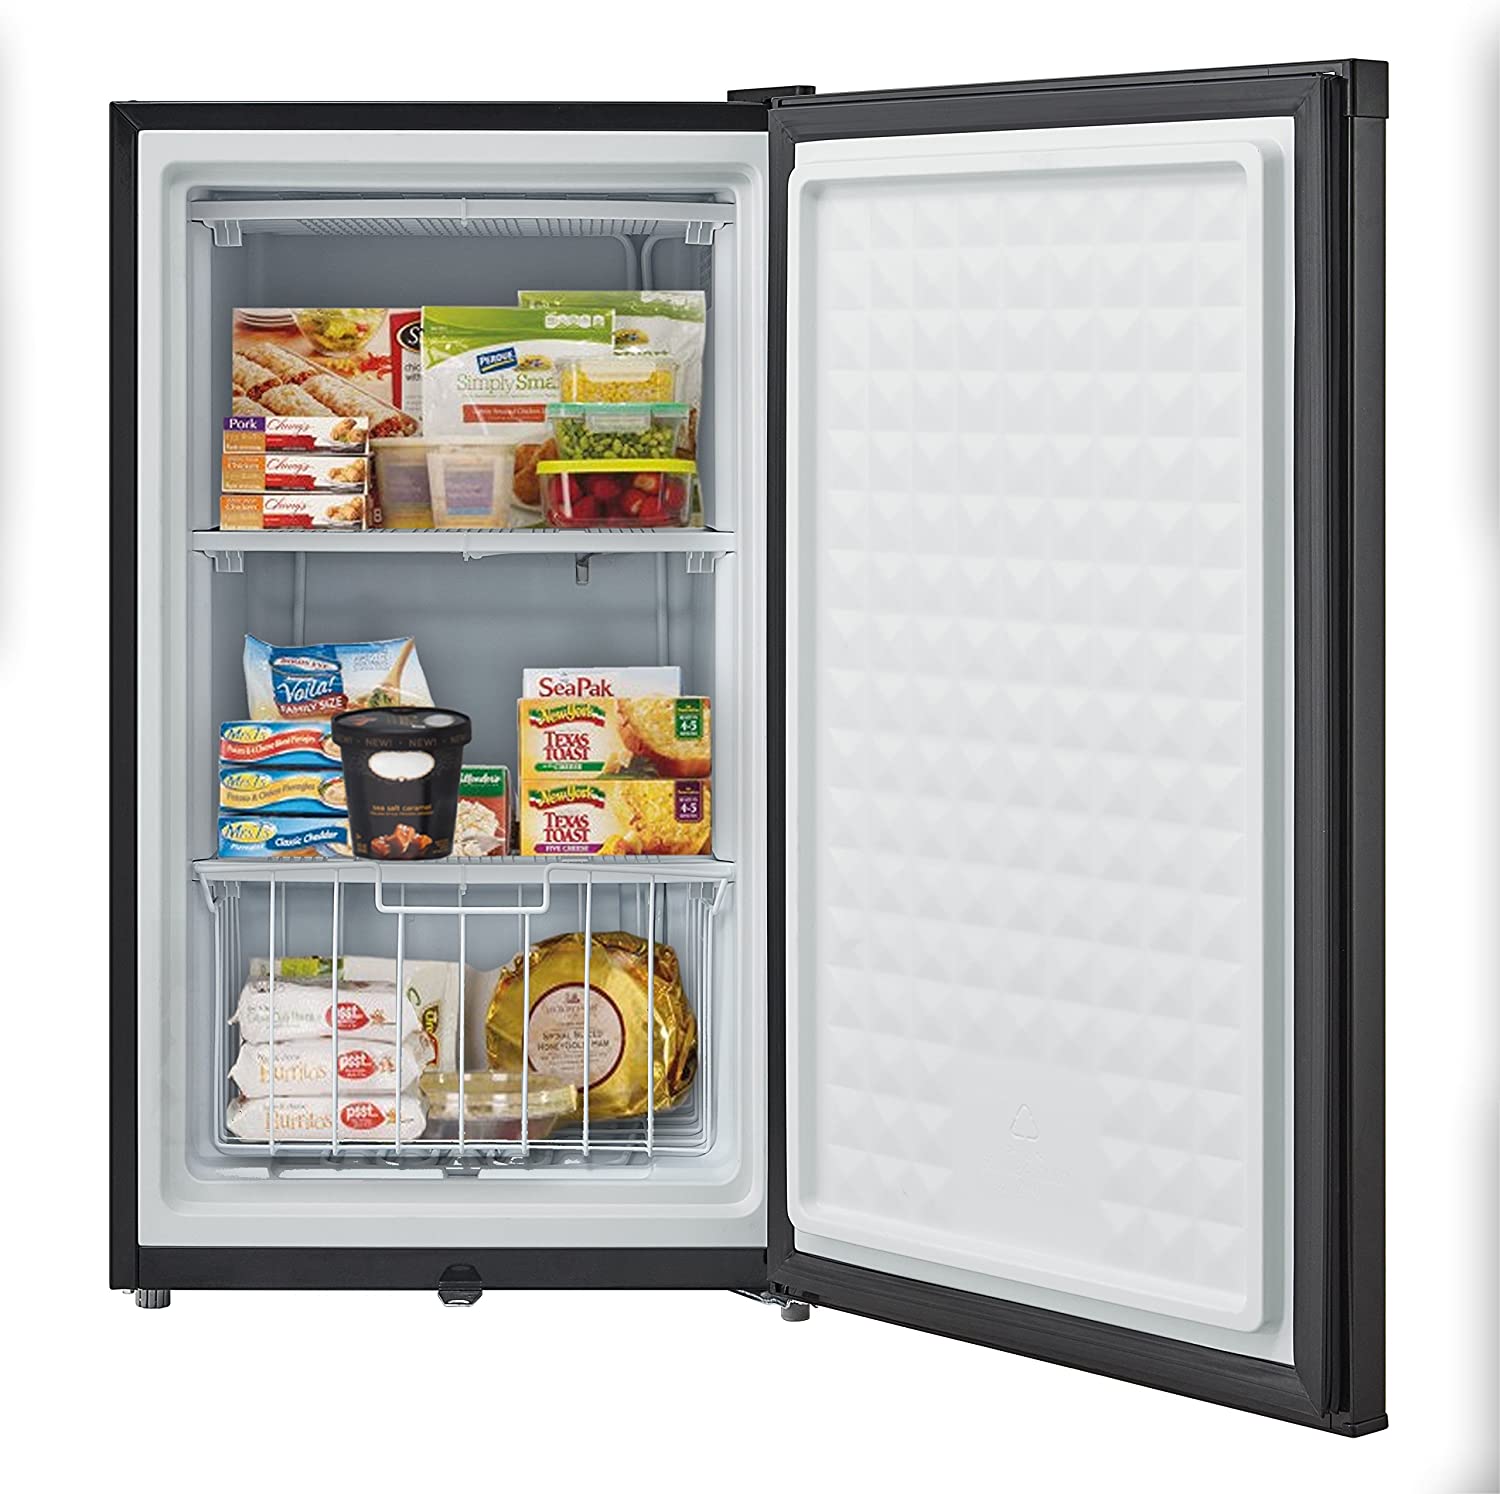 10 Best GARAGE FREEZER 2022 Review: Garage Ready Upright - Chest Freezers For Hot Garage All In One Cooling Gear Lab: Any Refrigerators Air Conditioners Freezers Ice Makers Coolers Fans Reviewed And Compared.